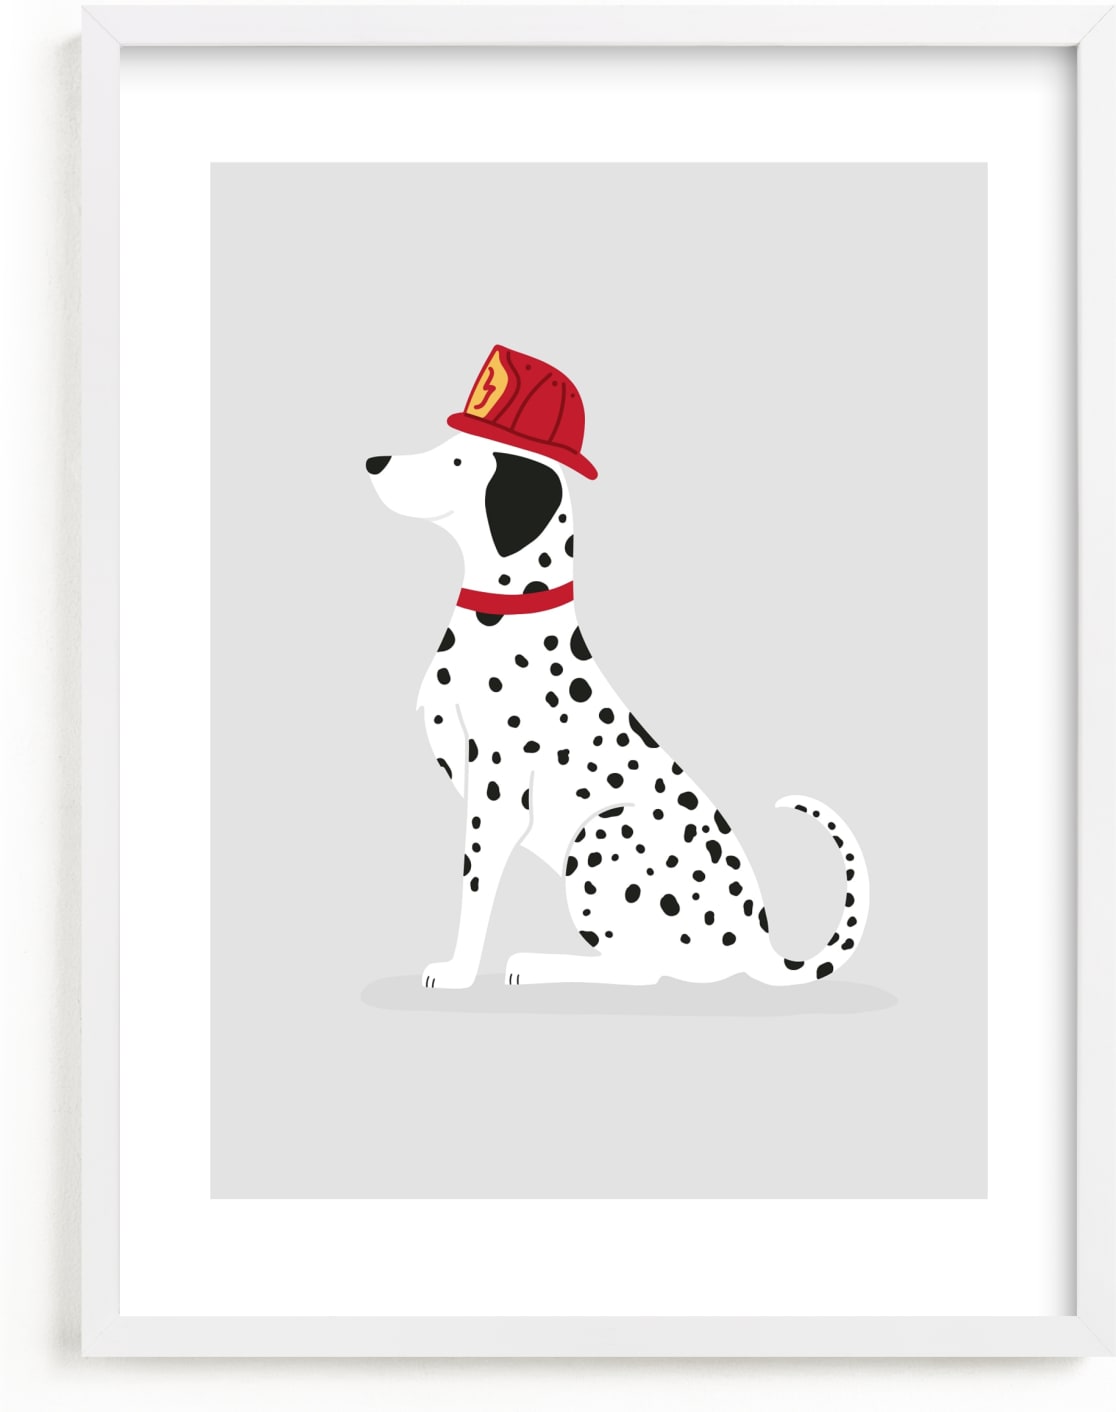 This is a black and white kids wall art by Ashley Presutti Beasley called Fire Dalmatian.